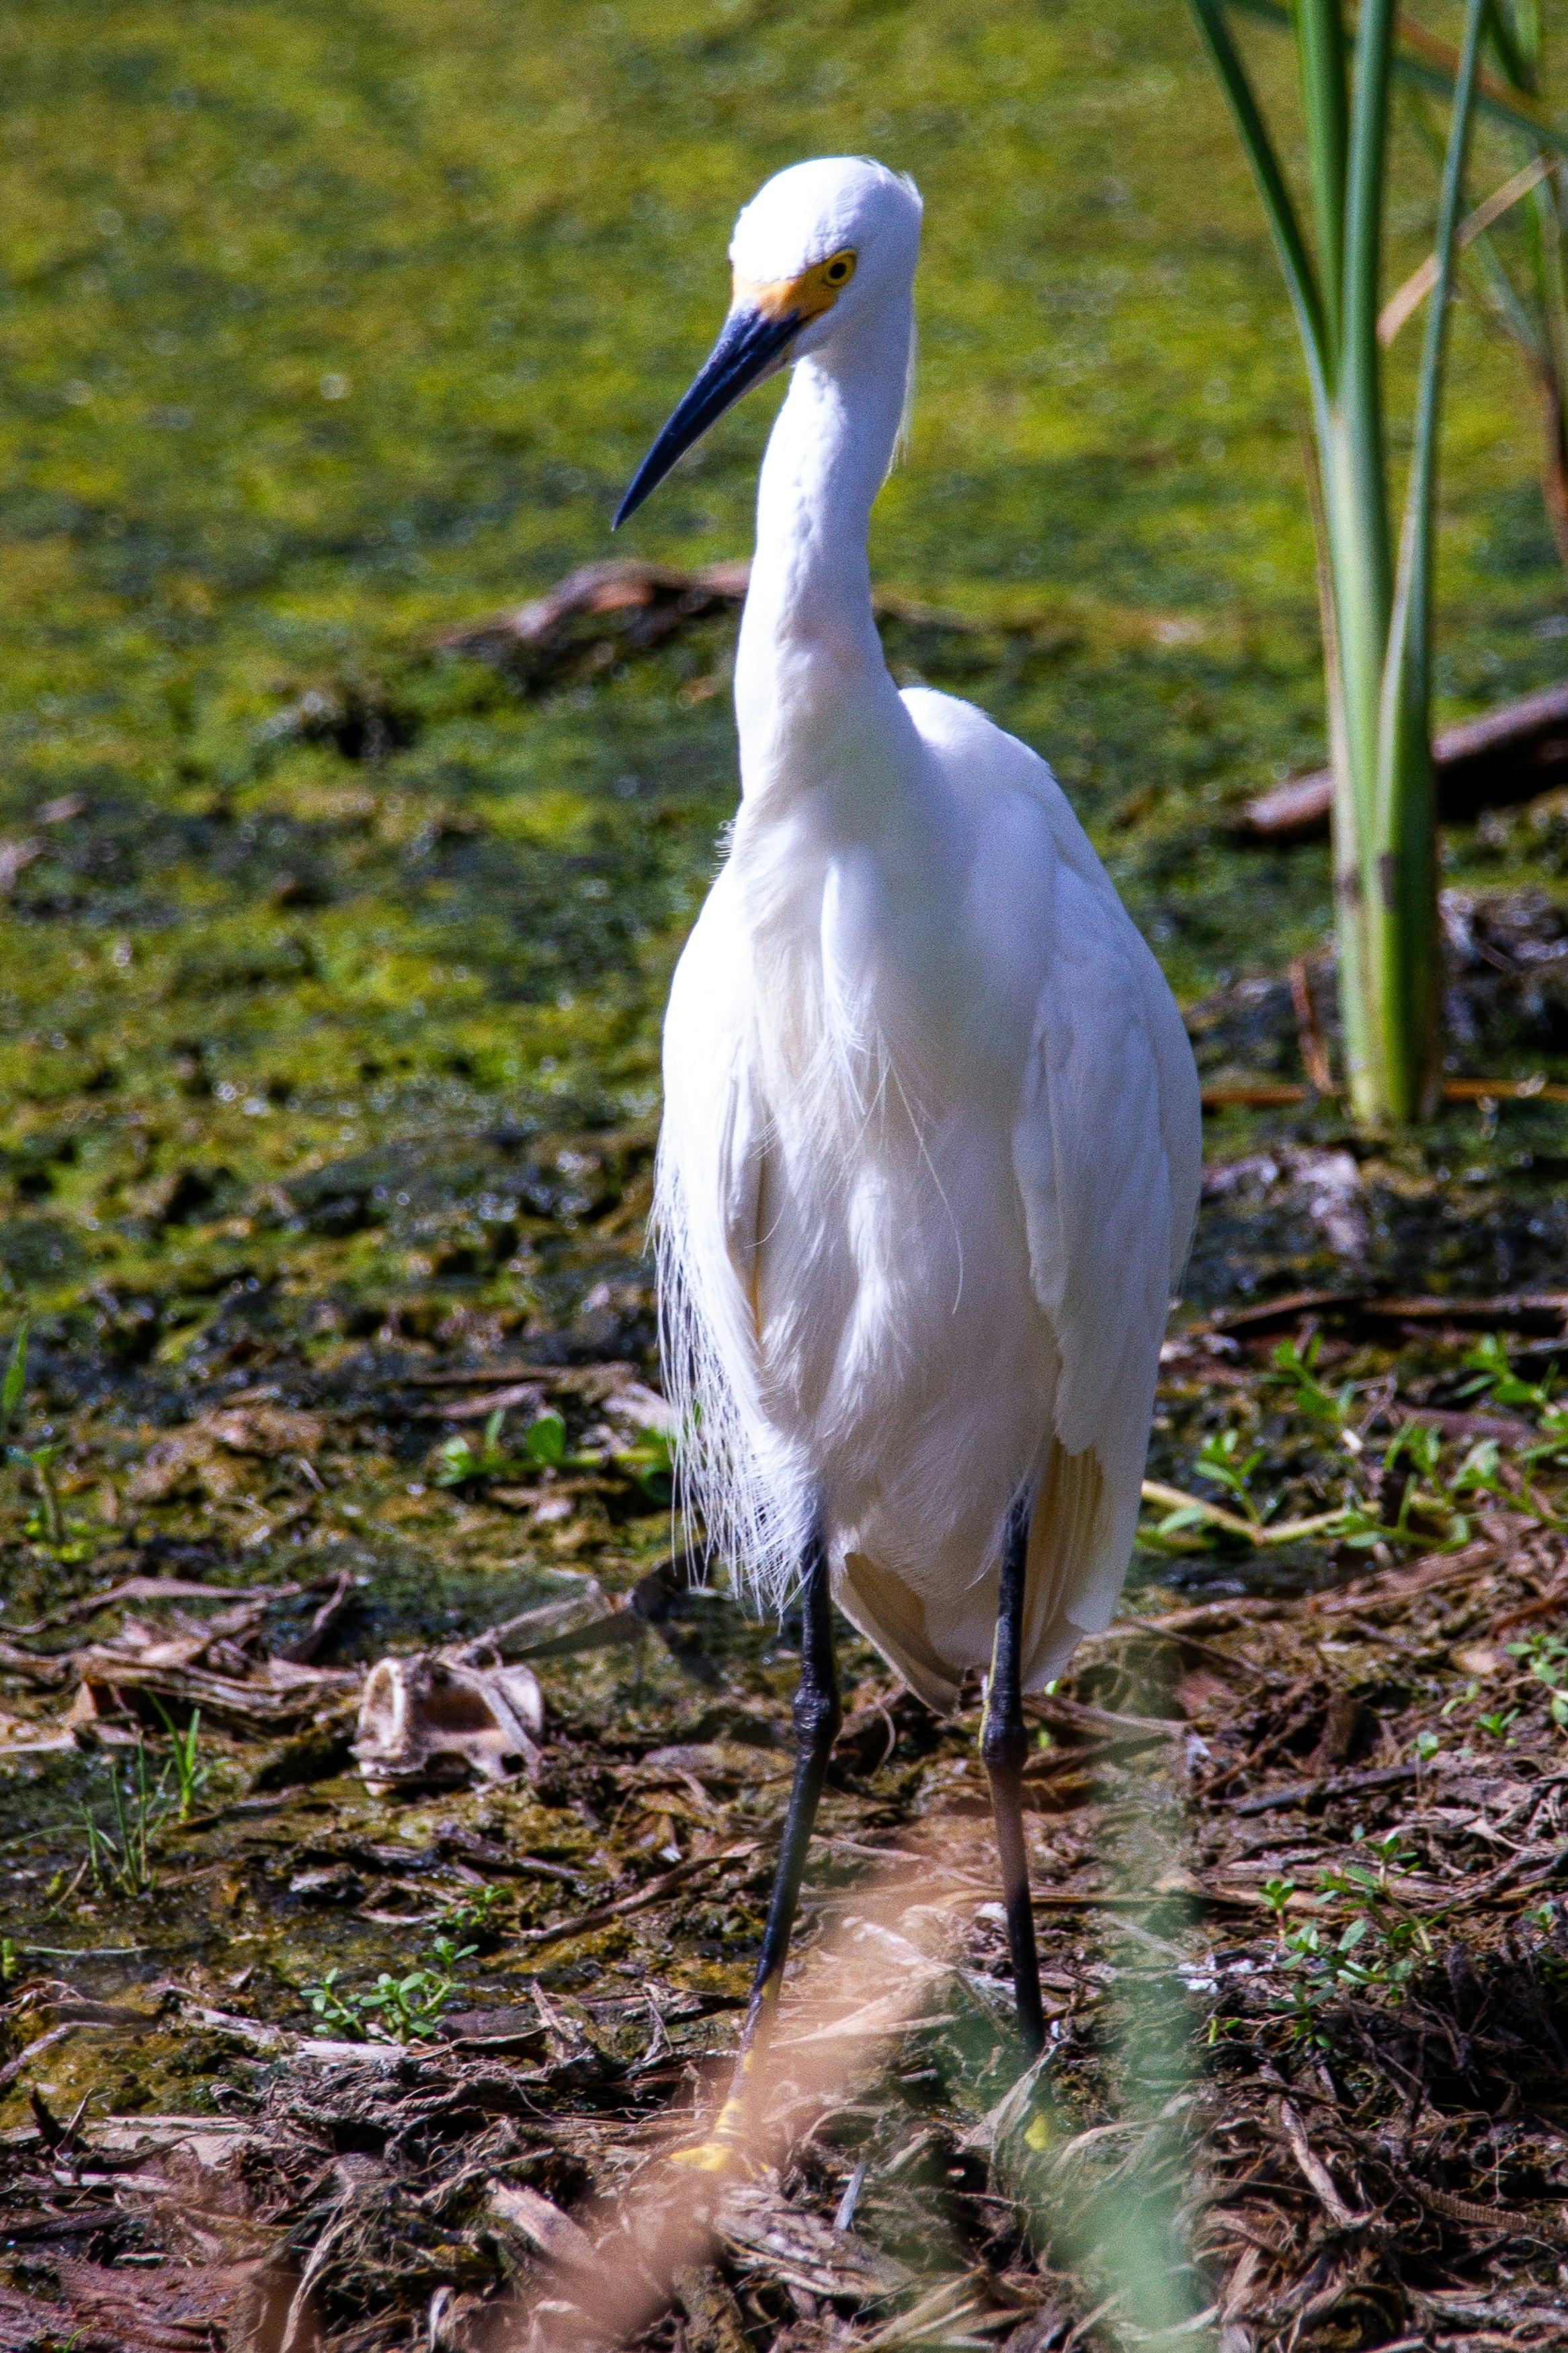 A snowy egret stands in the marsh.